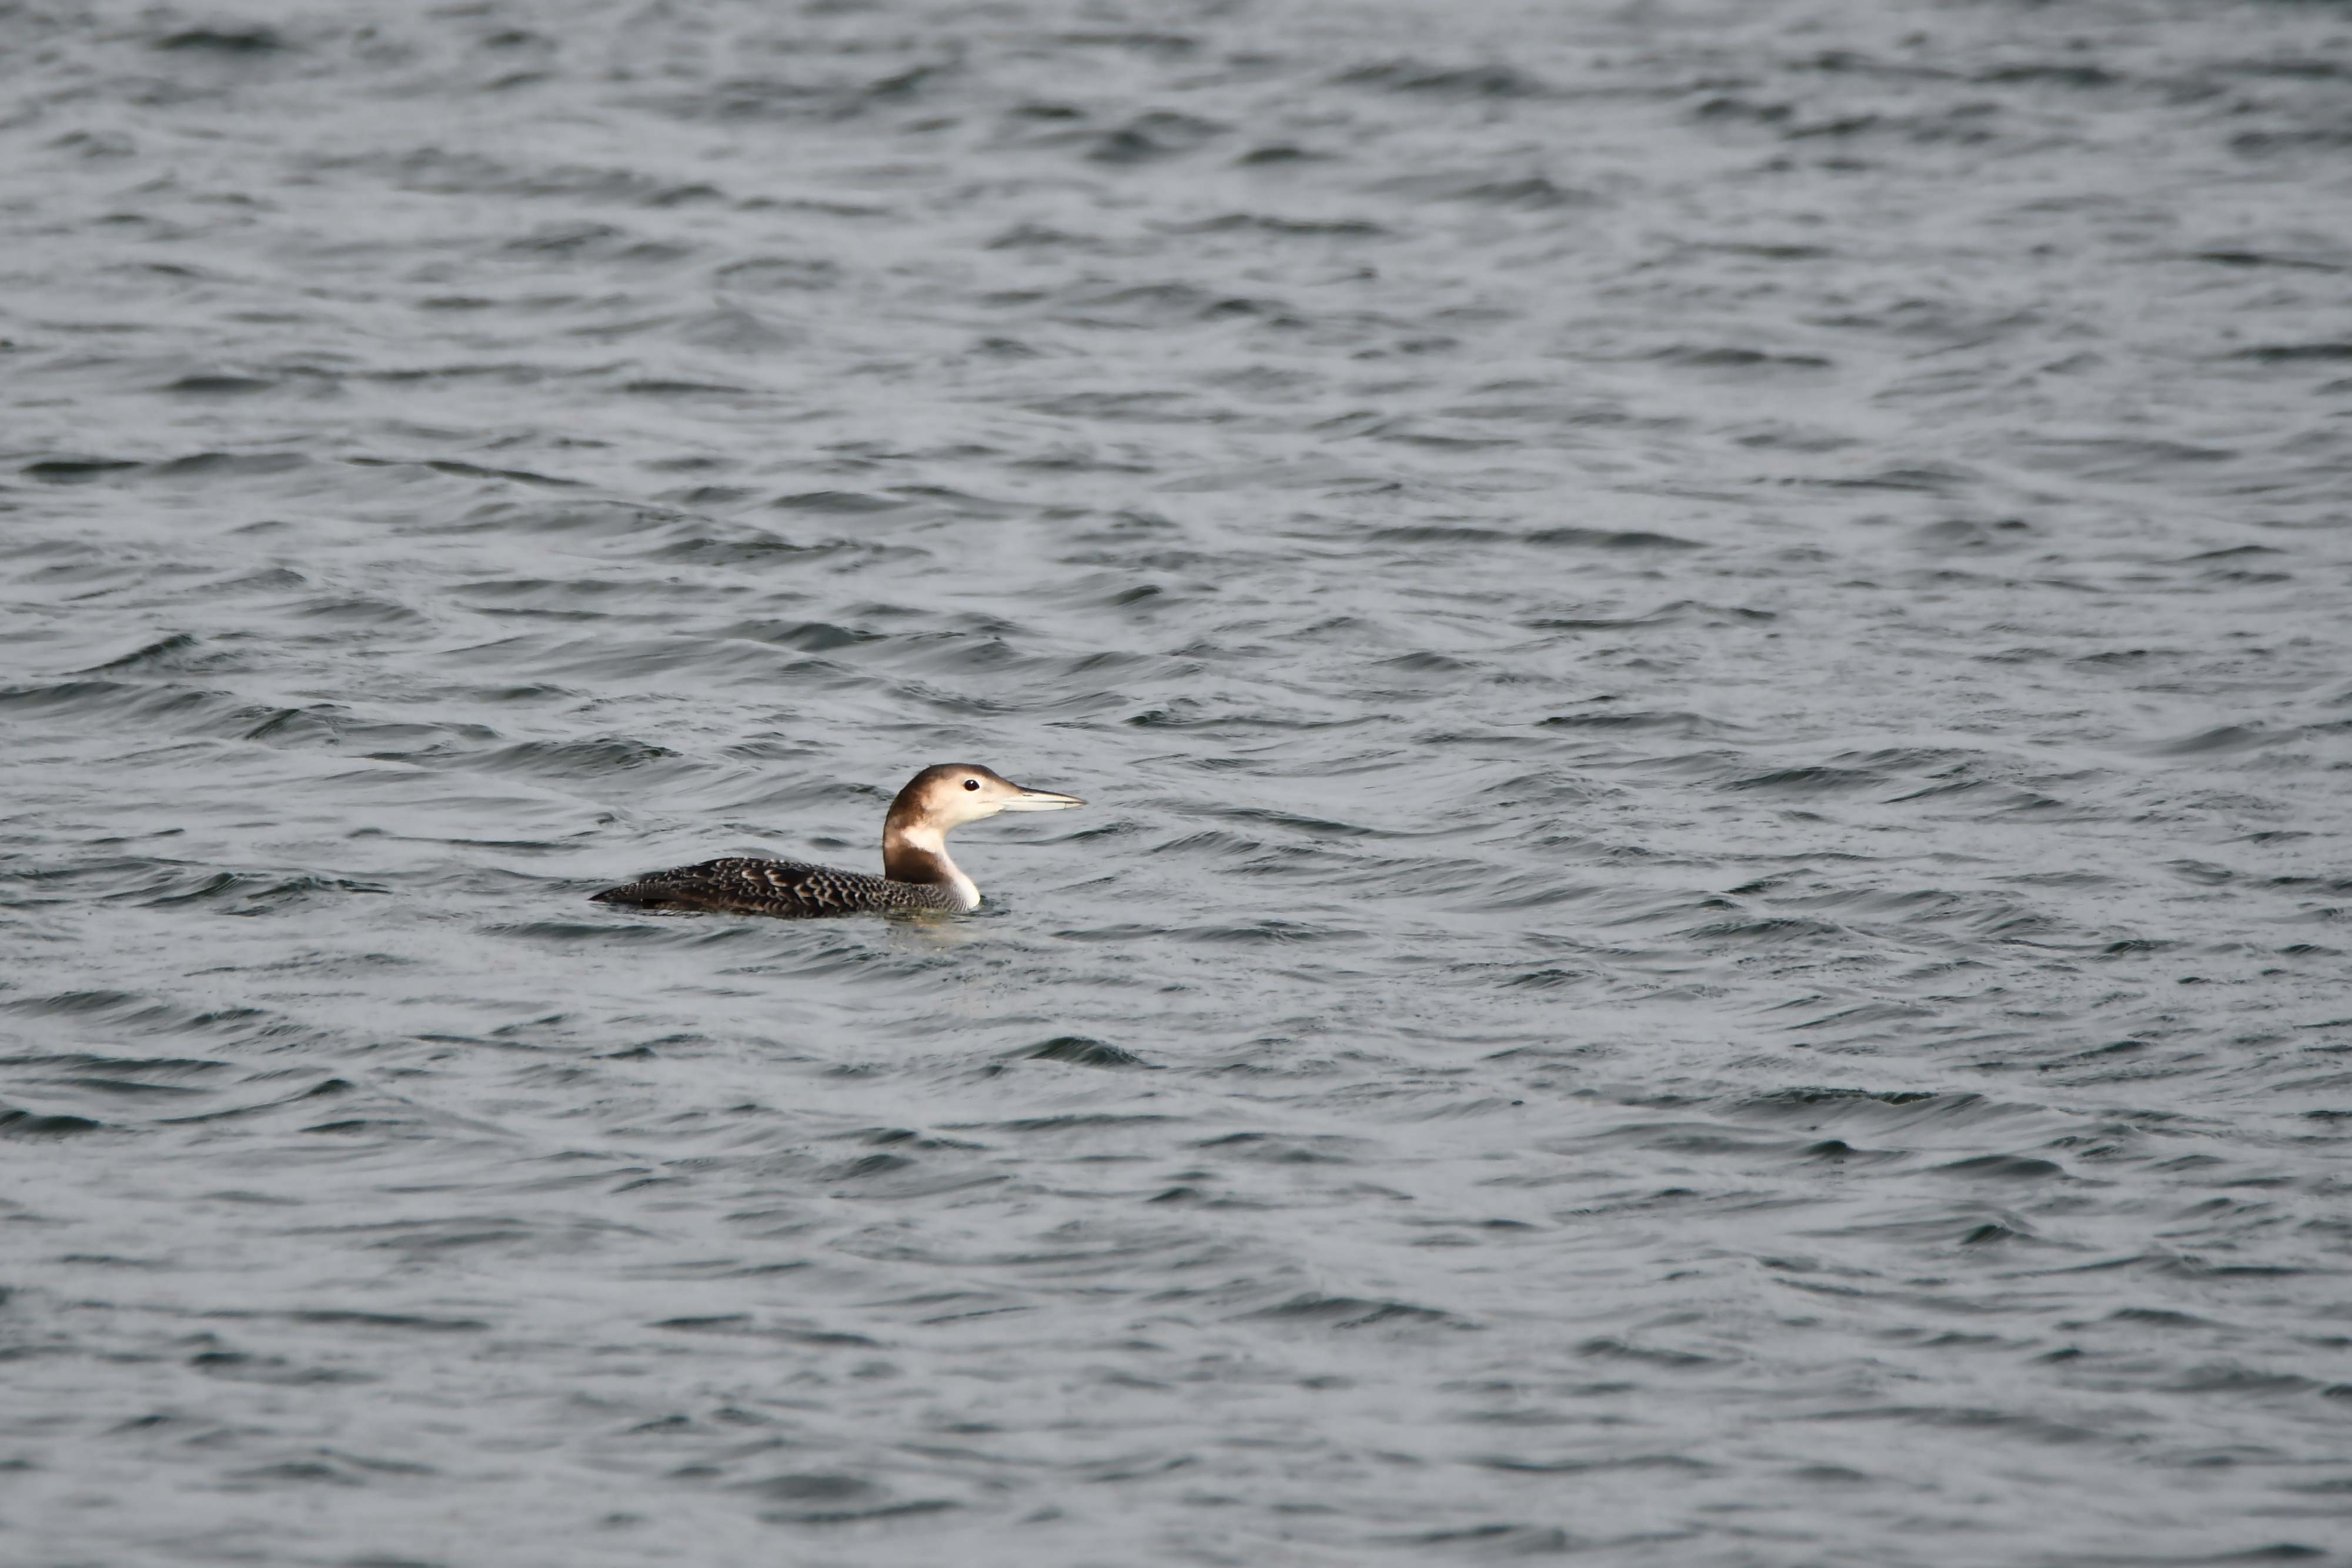 A common loon floating on the water